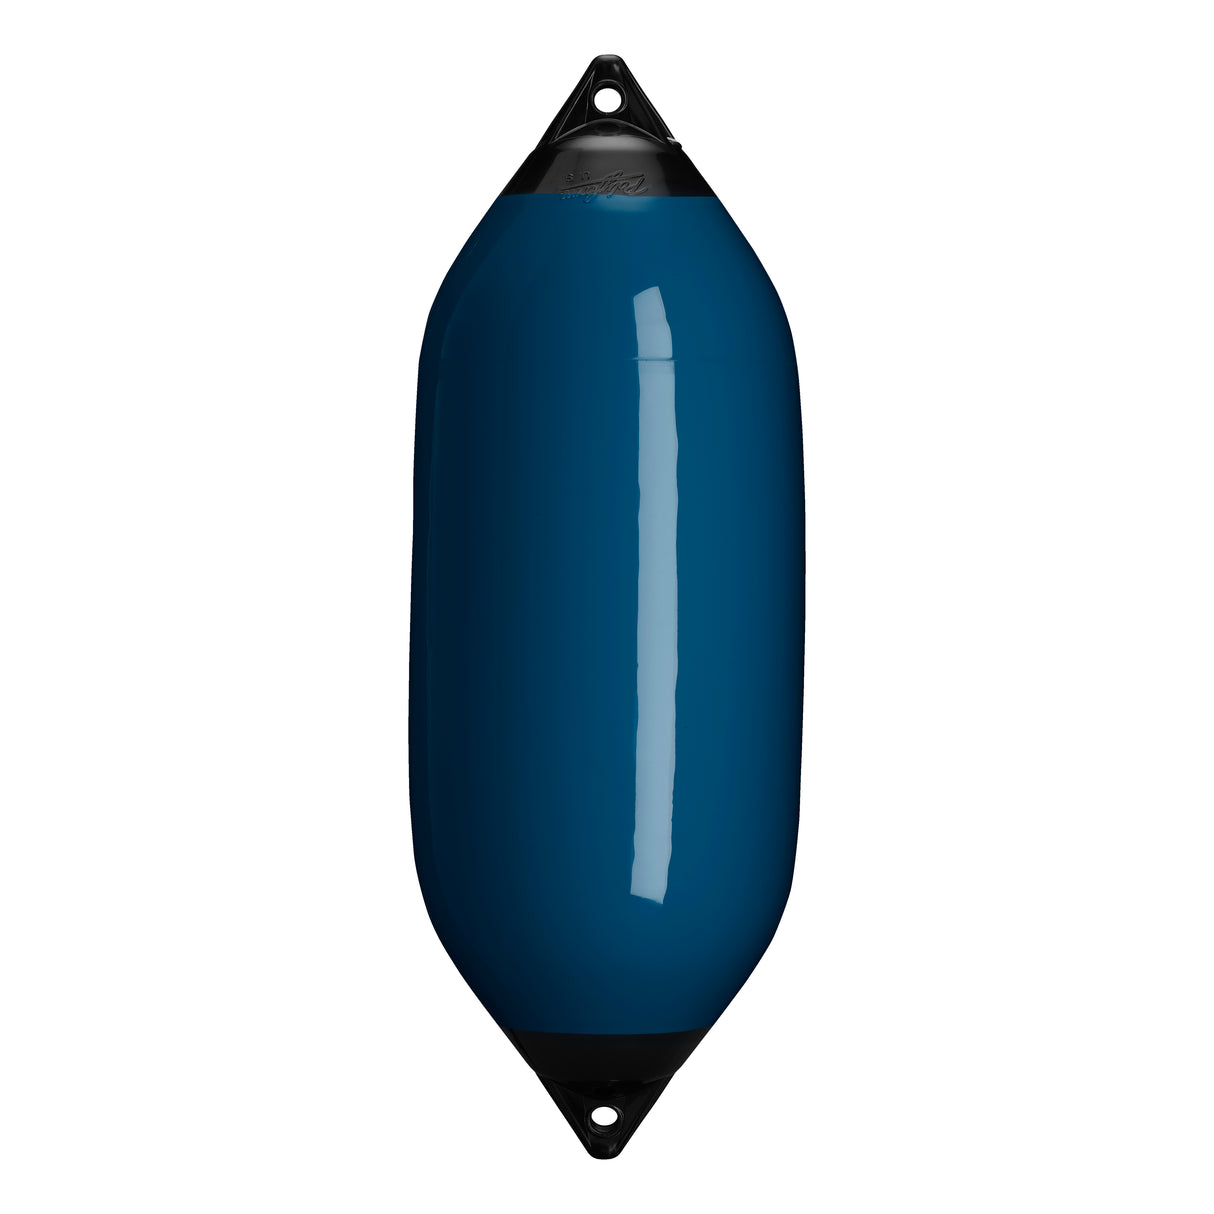 Catalina Blue boat fender with Black-Top, Polyform F-7